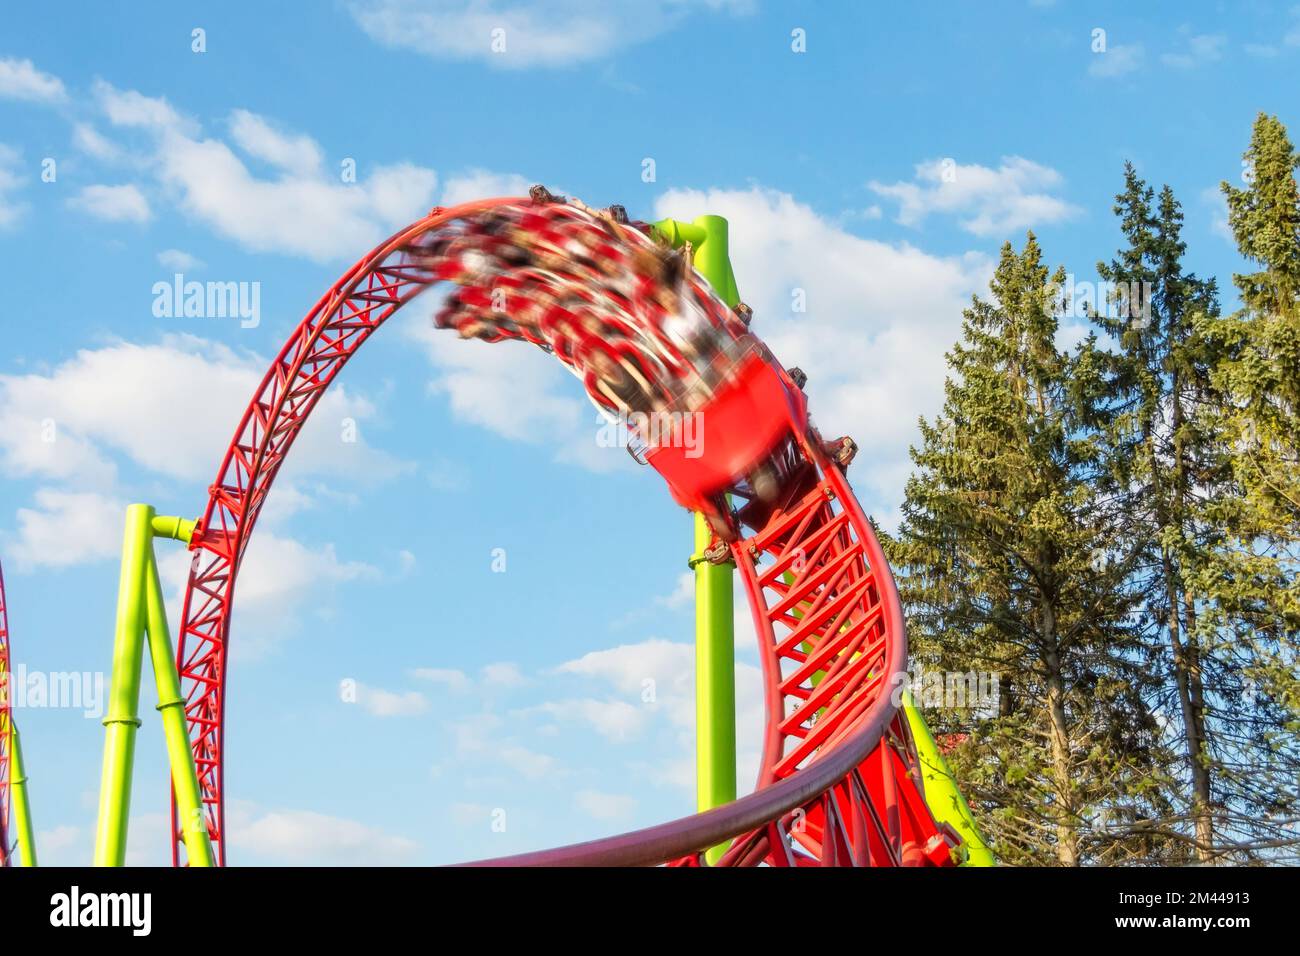 Amusement cart makes circular loops upside down and turns sharply out of the loop with motion blur effect, a roller coaster Stock Photo